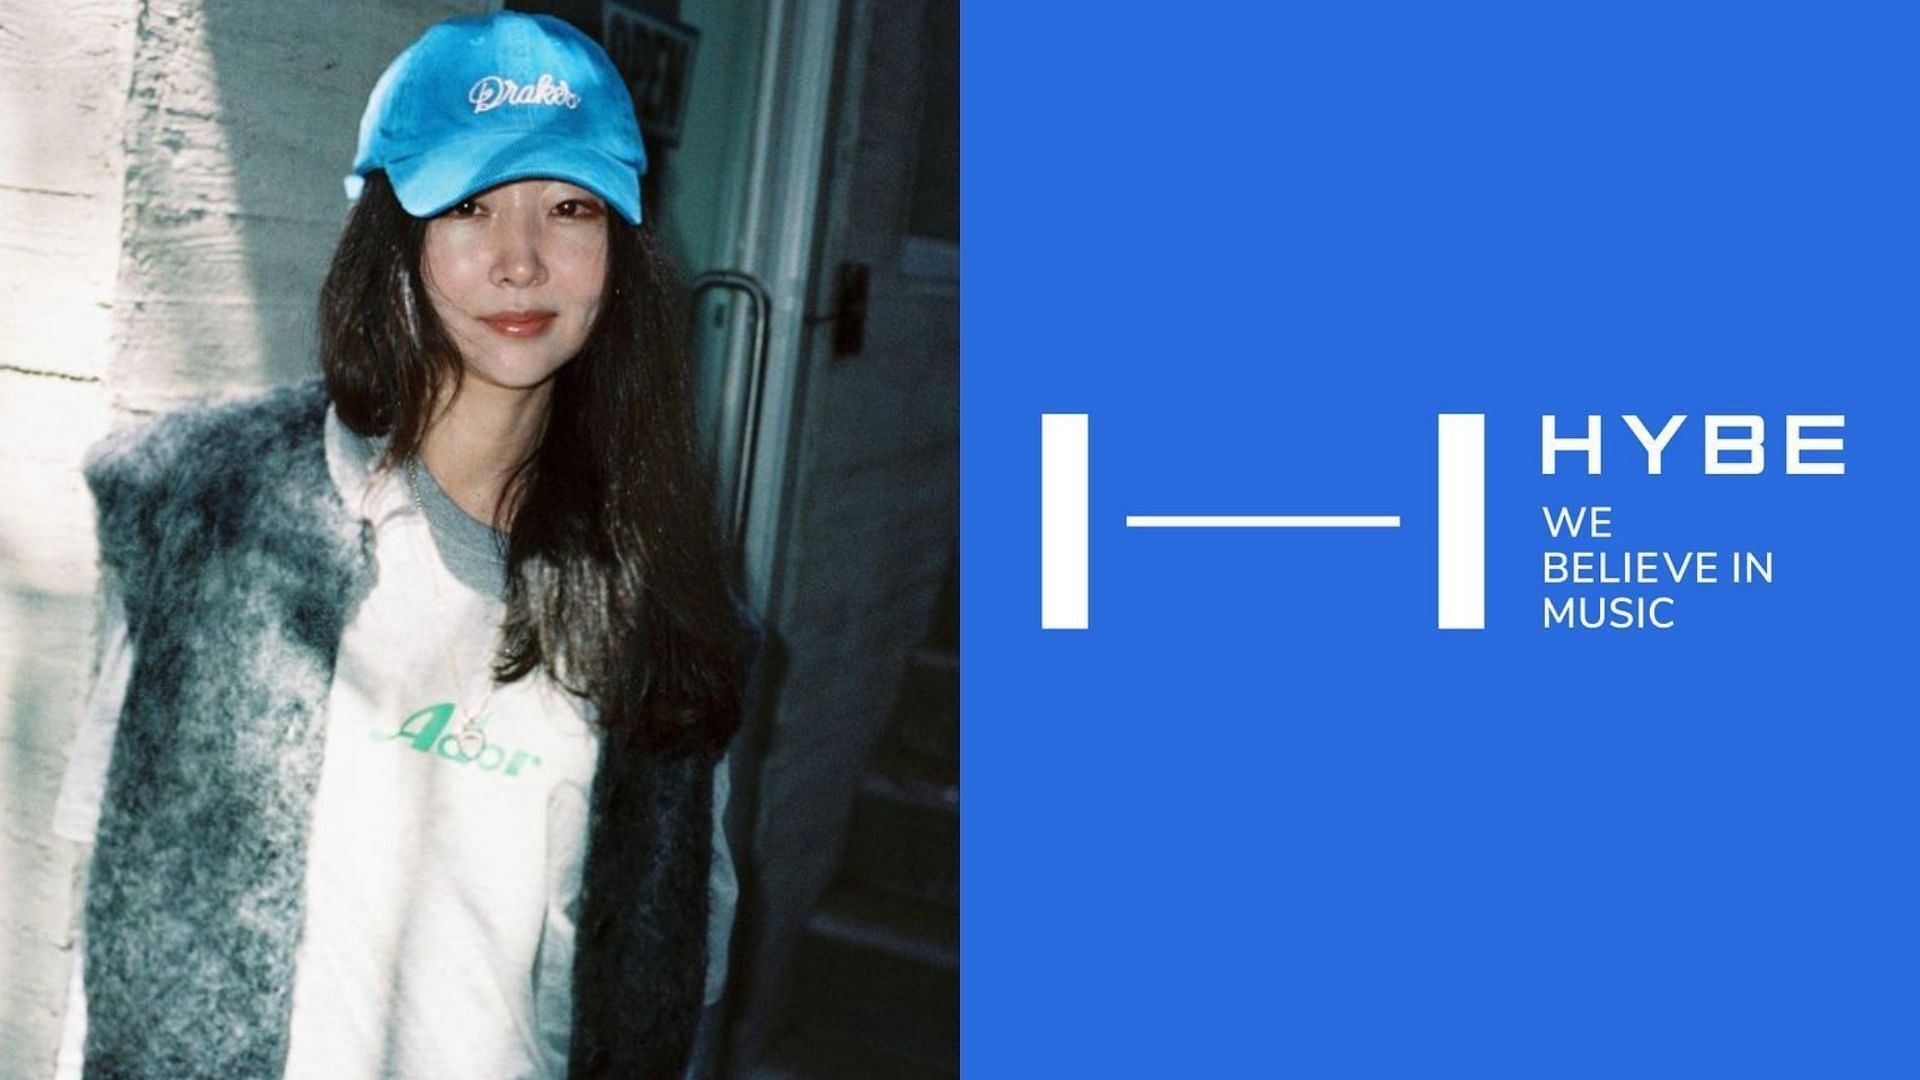 Min hee-jin and HYBE Labels (Image via Instagram/@min.hee-jin, @hybe.labels.audition)